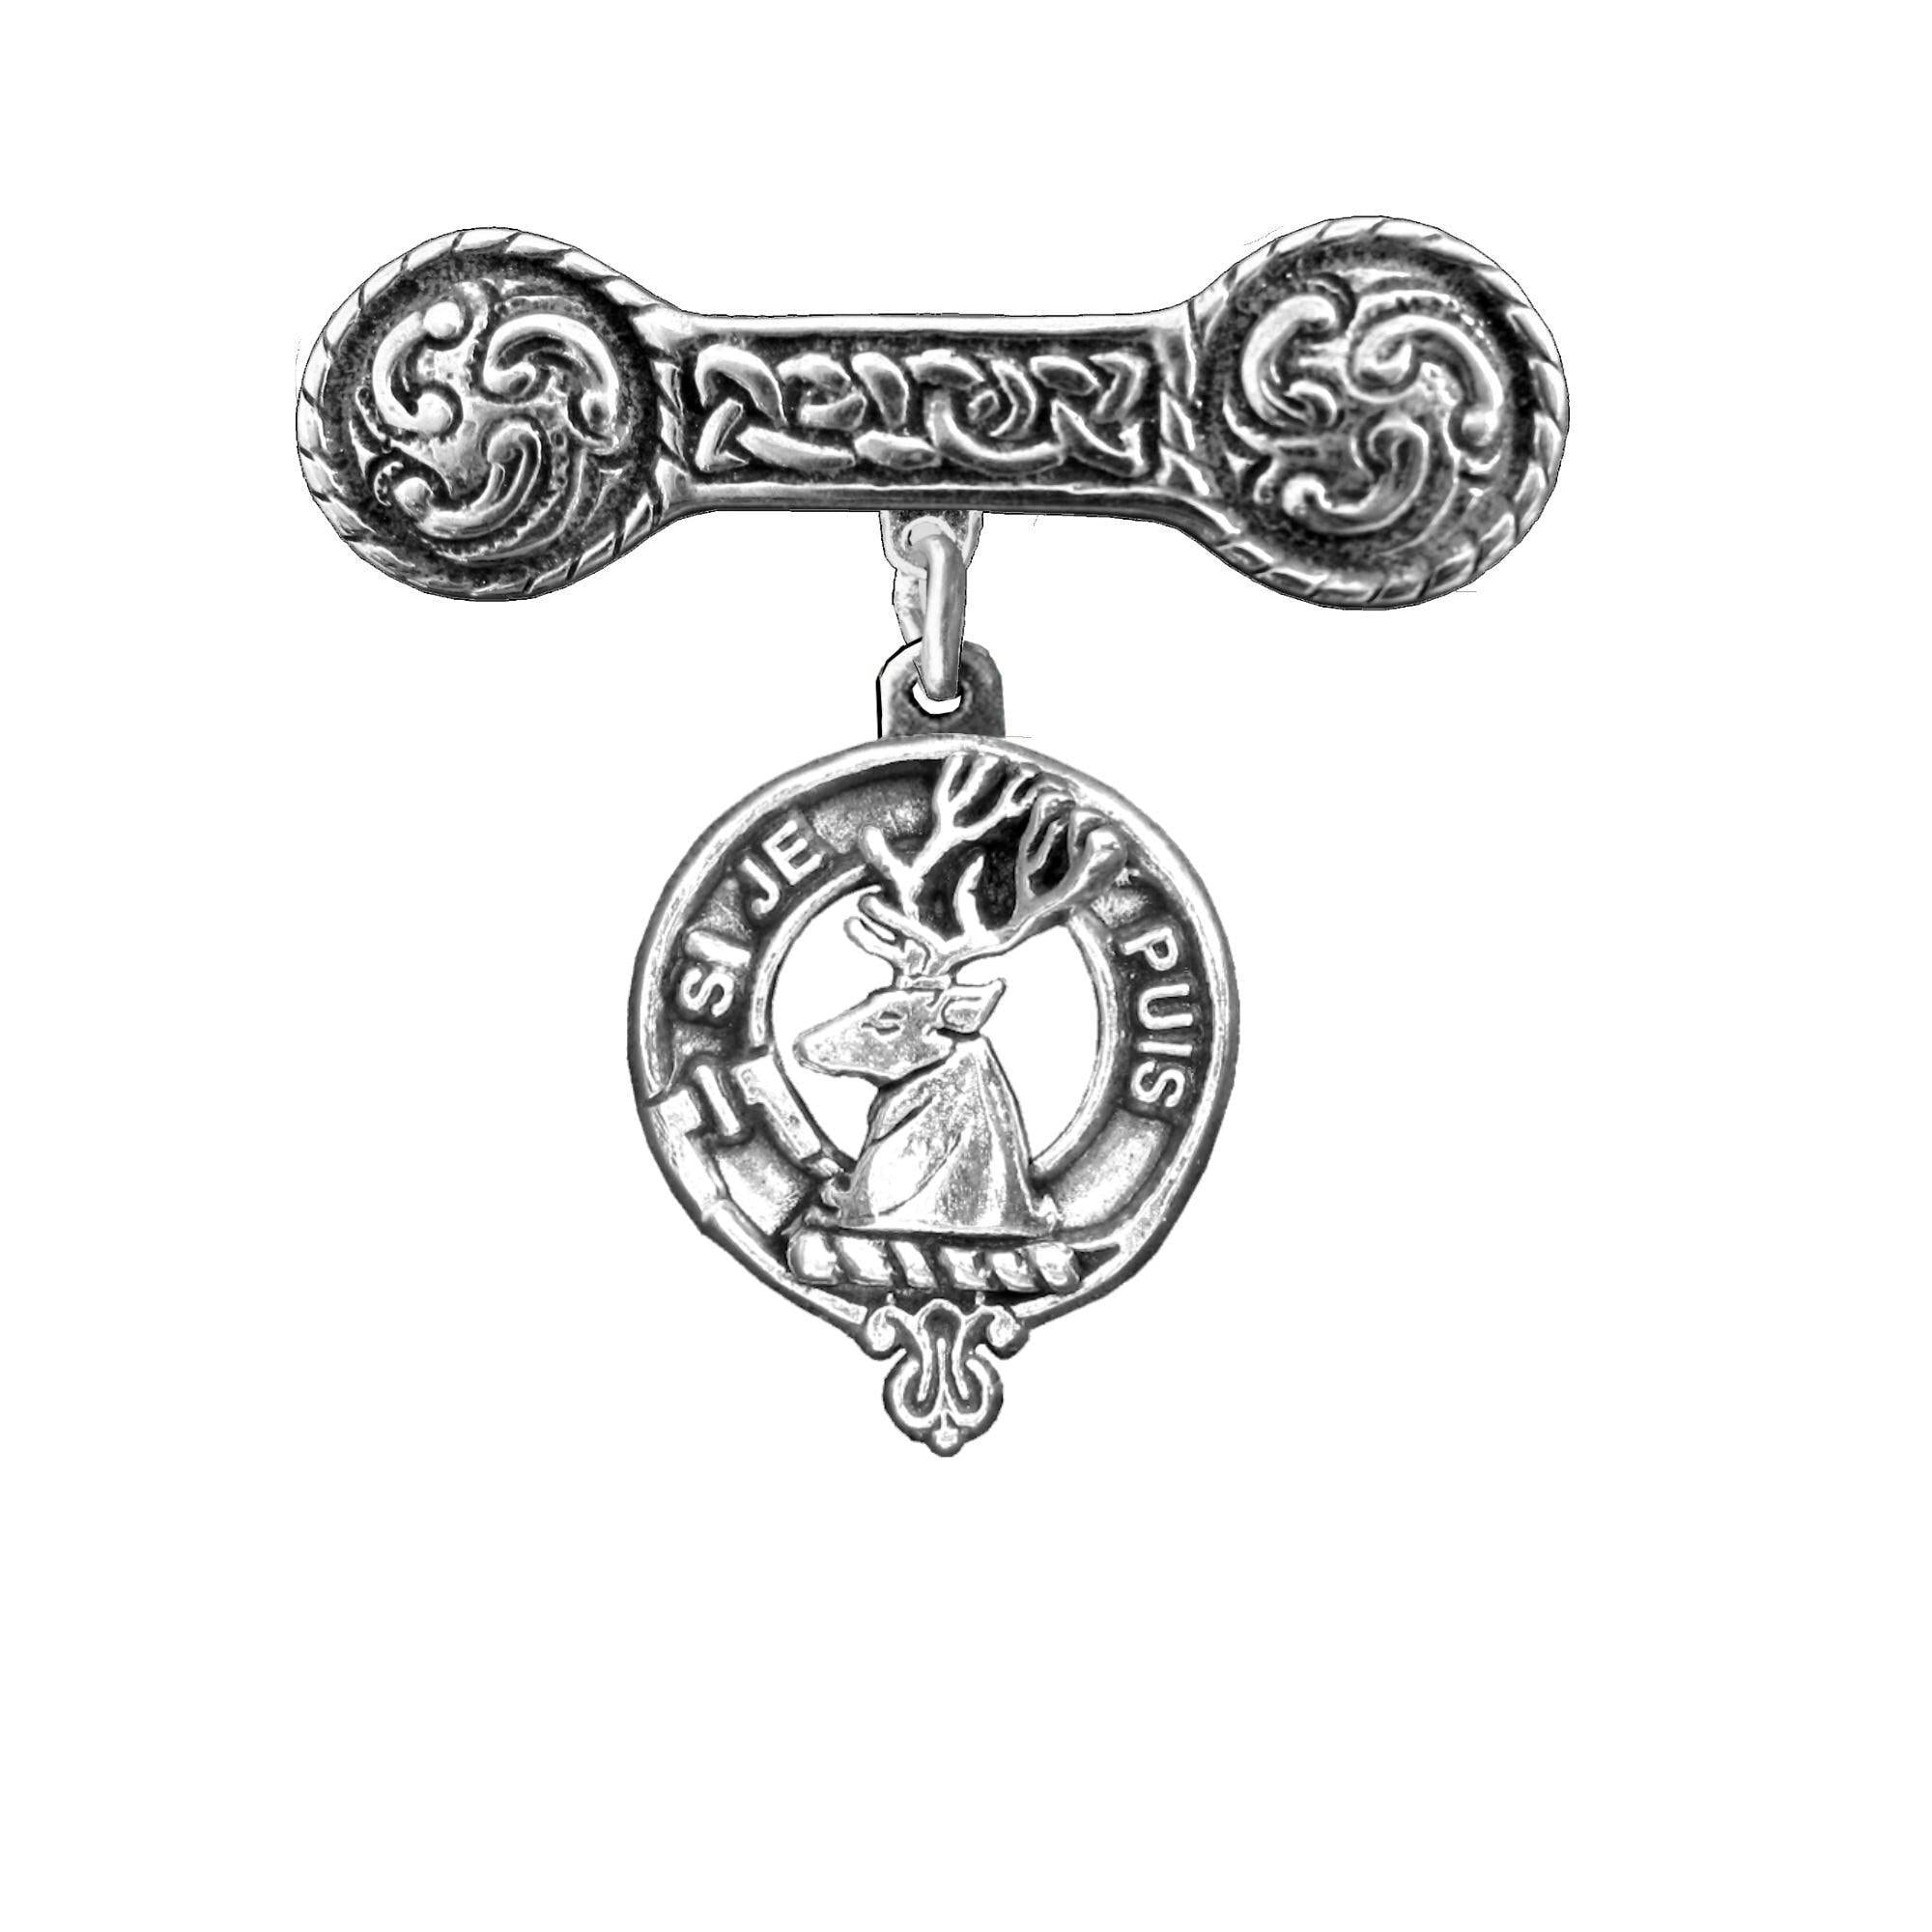 Colquhoun Clan Crest Iona Bar Brooch - Sterling Silver